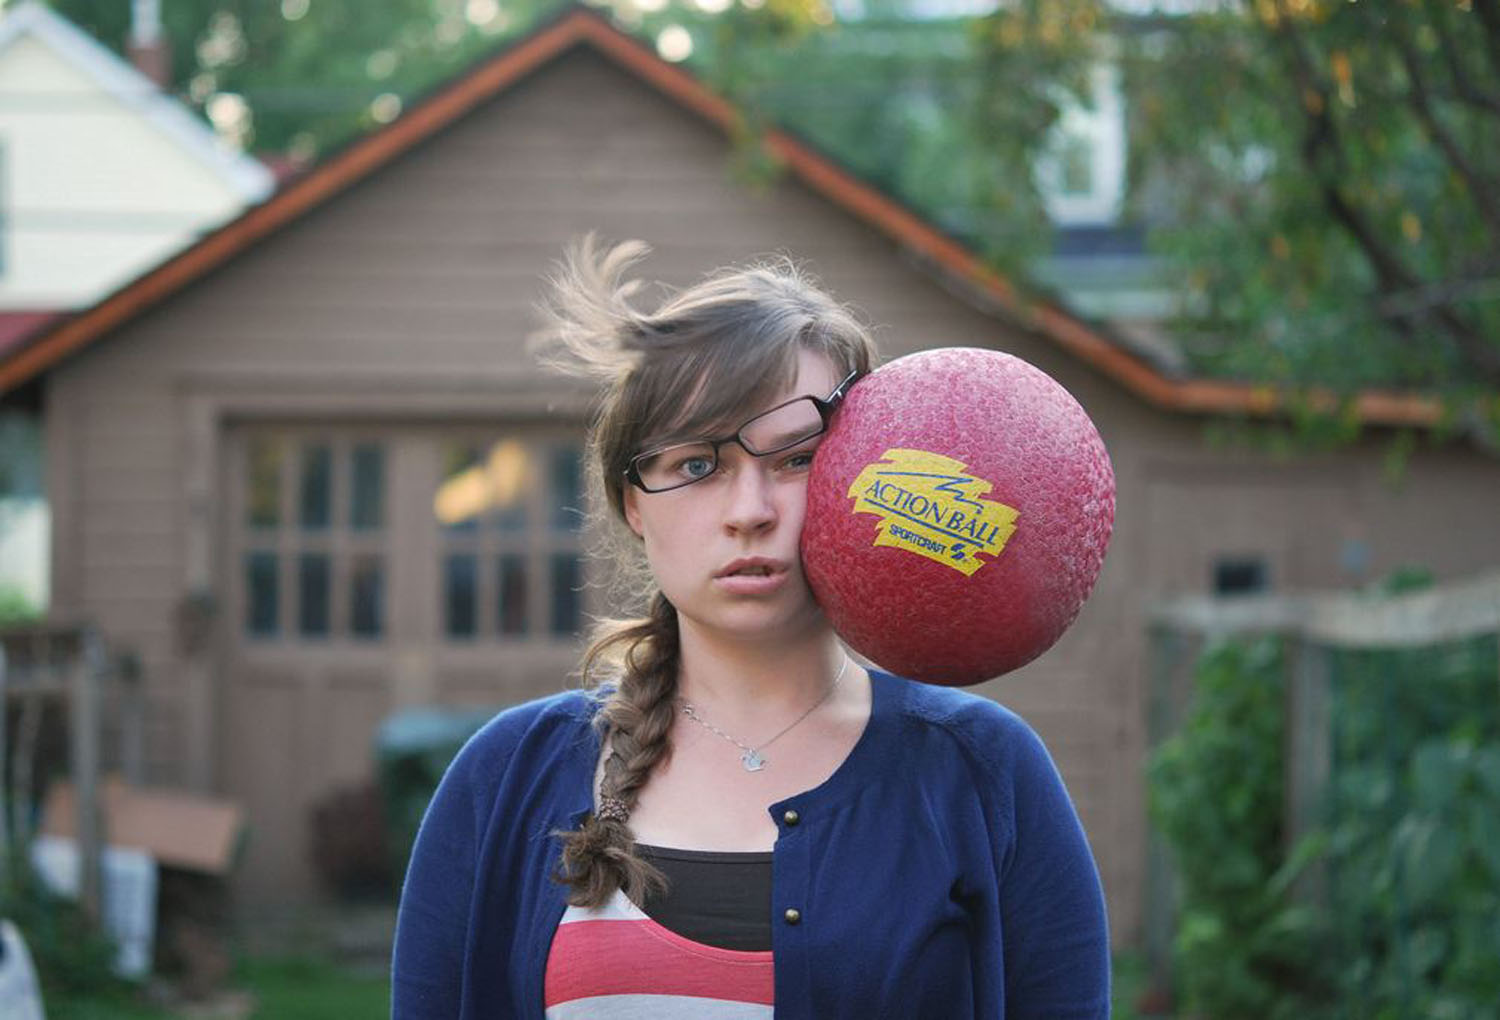 perfect timing self portrait photography funny - Action Ball Sportcrat